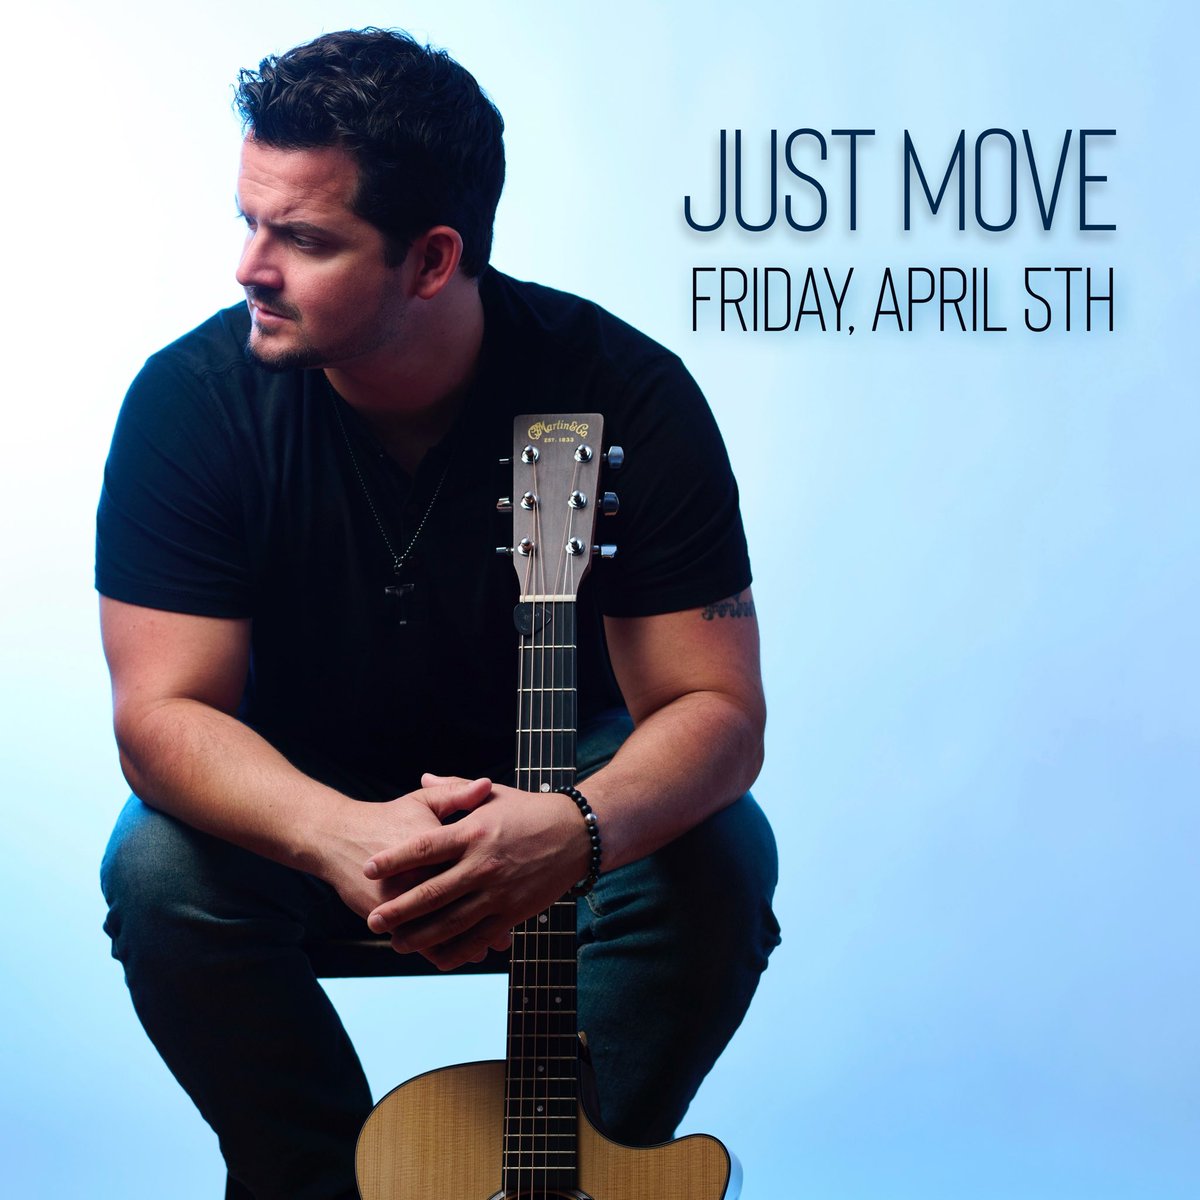 New song, Just Move, will be out Friday, April 5th

#kennycurcio #kennycurciomusic #justmove #country #rock #singer #songwriter #newsong #newmusic  #letsgetmovin